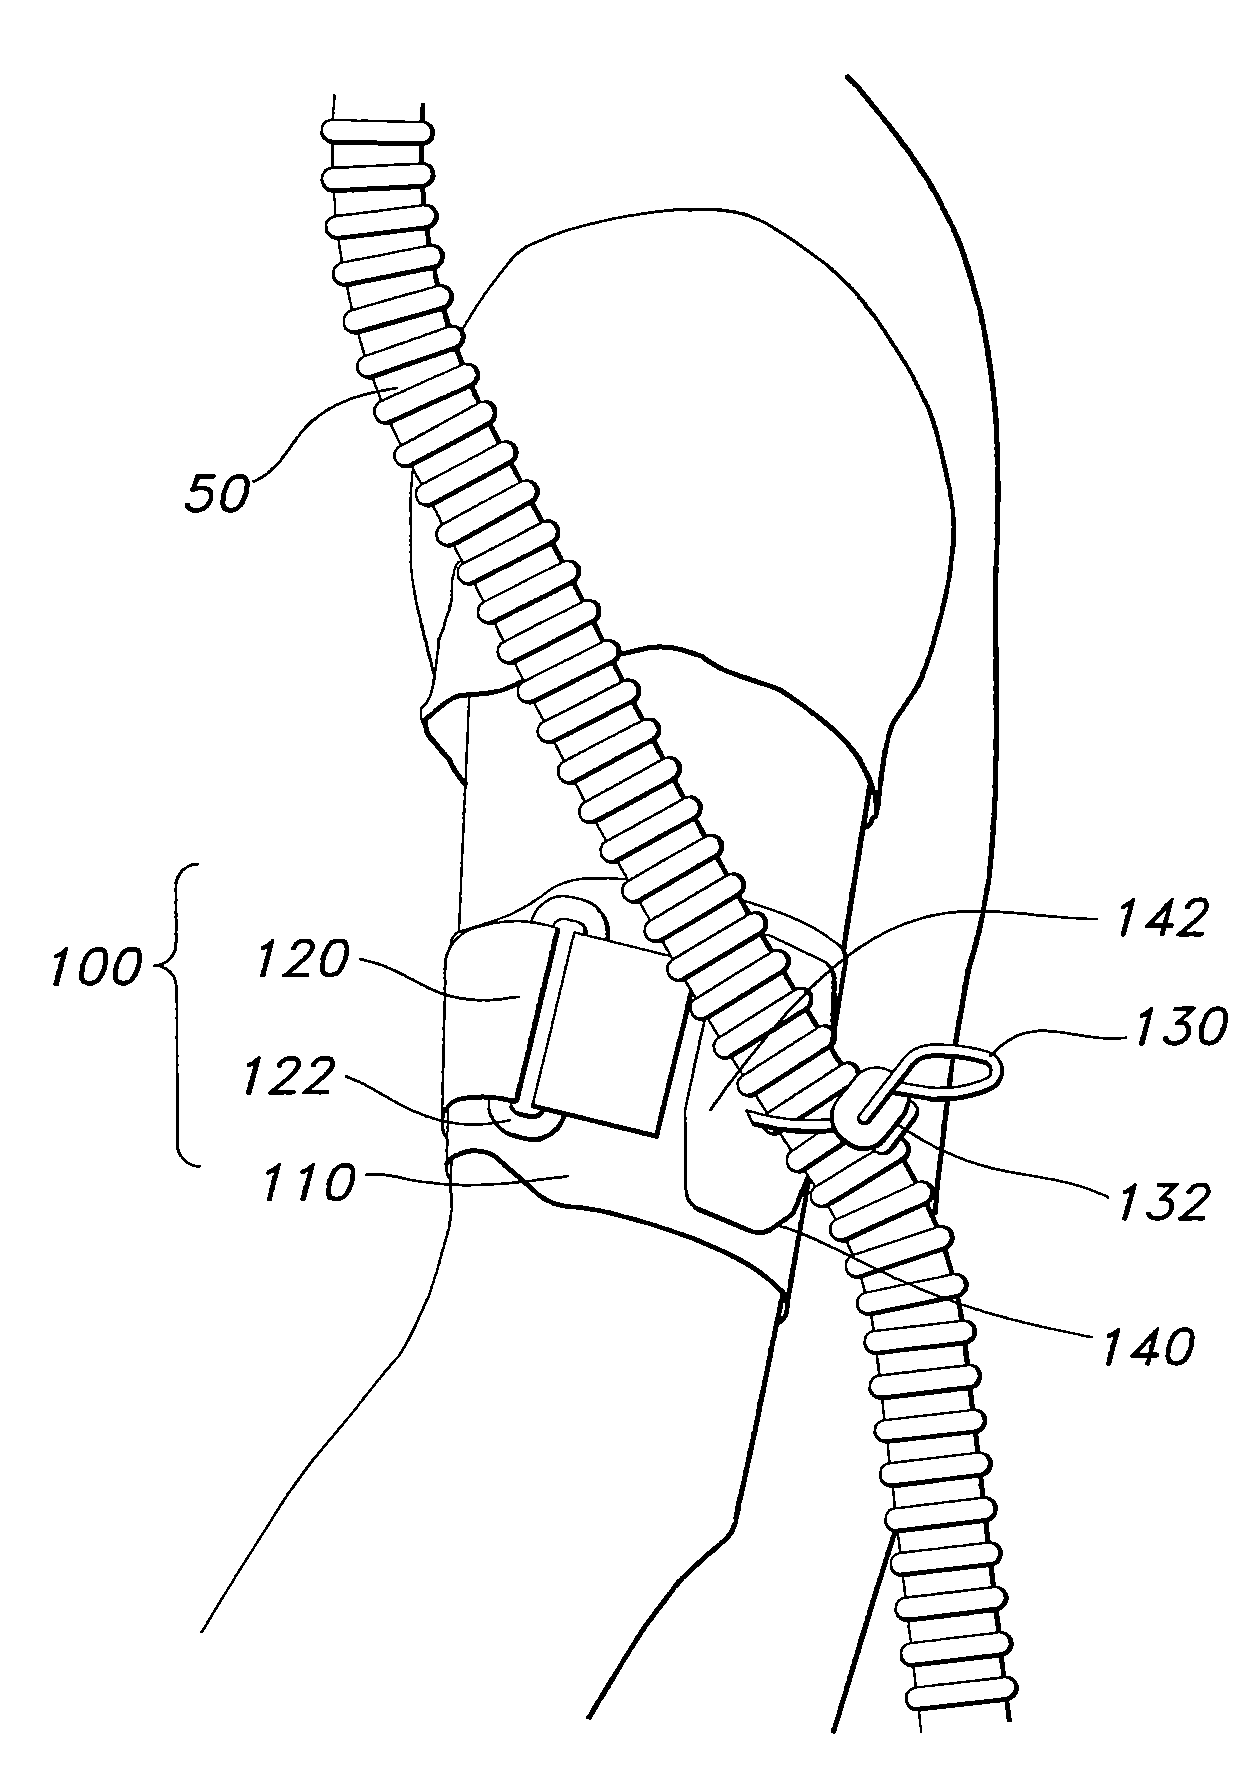 Apparatus, systems, and methods for securing a breathing tube to an arm